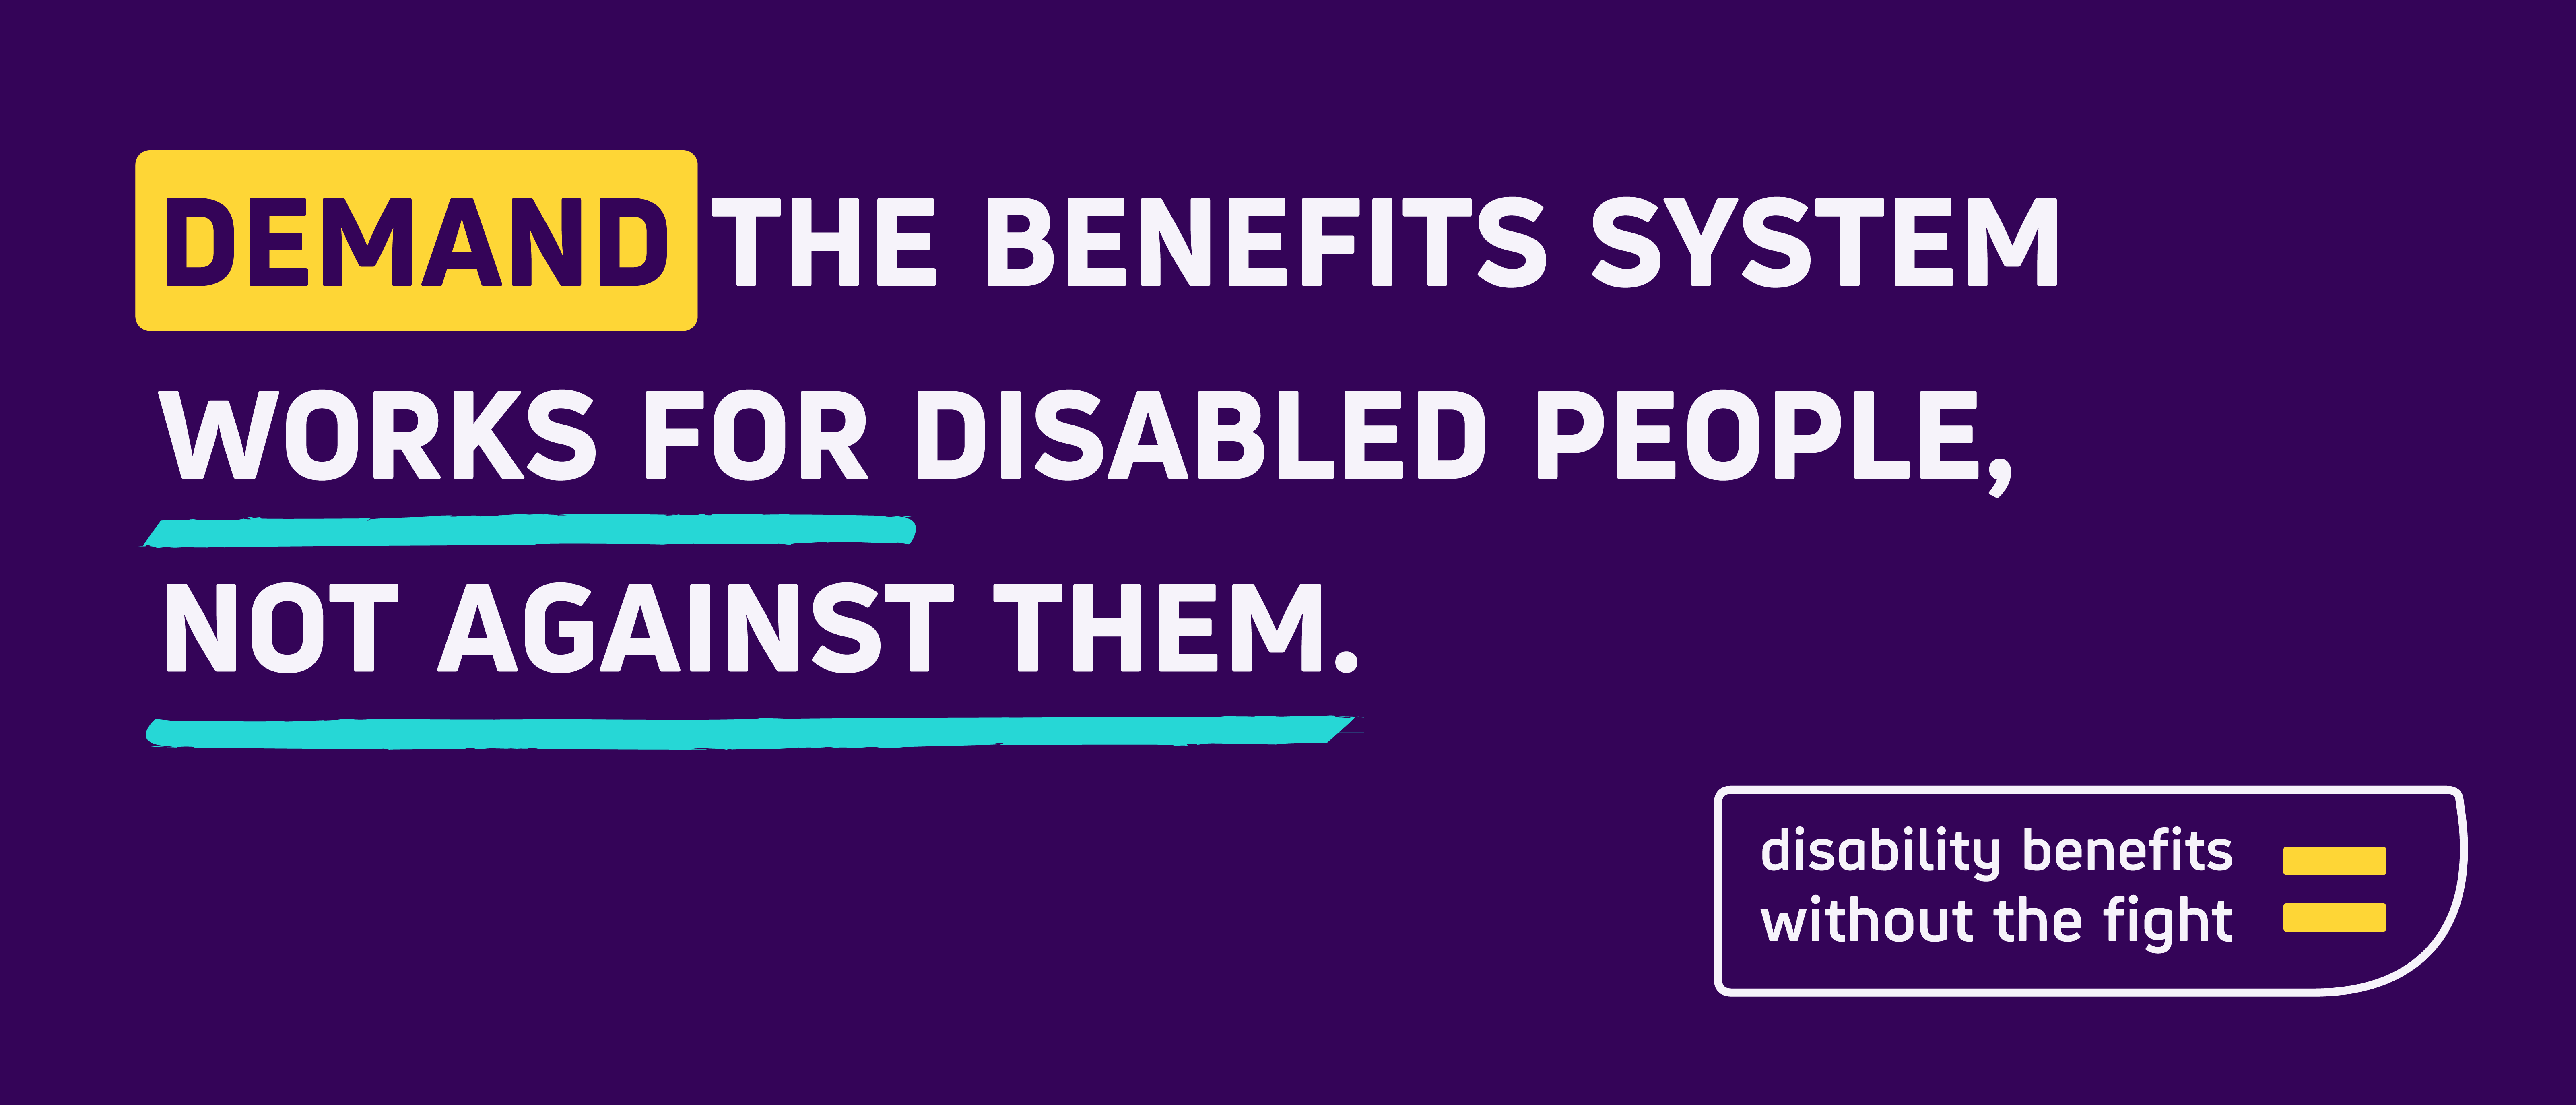 Demand the benefits system works for disabled people, not against them. With Disability Benefits Without the Fight campaign logo